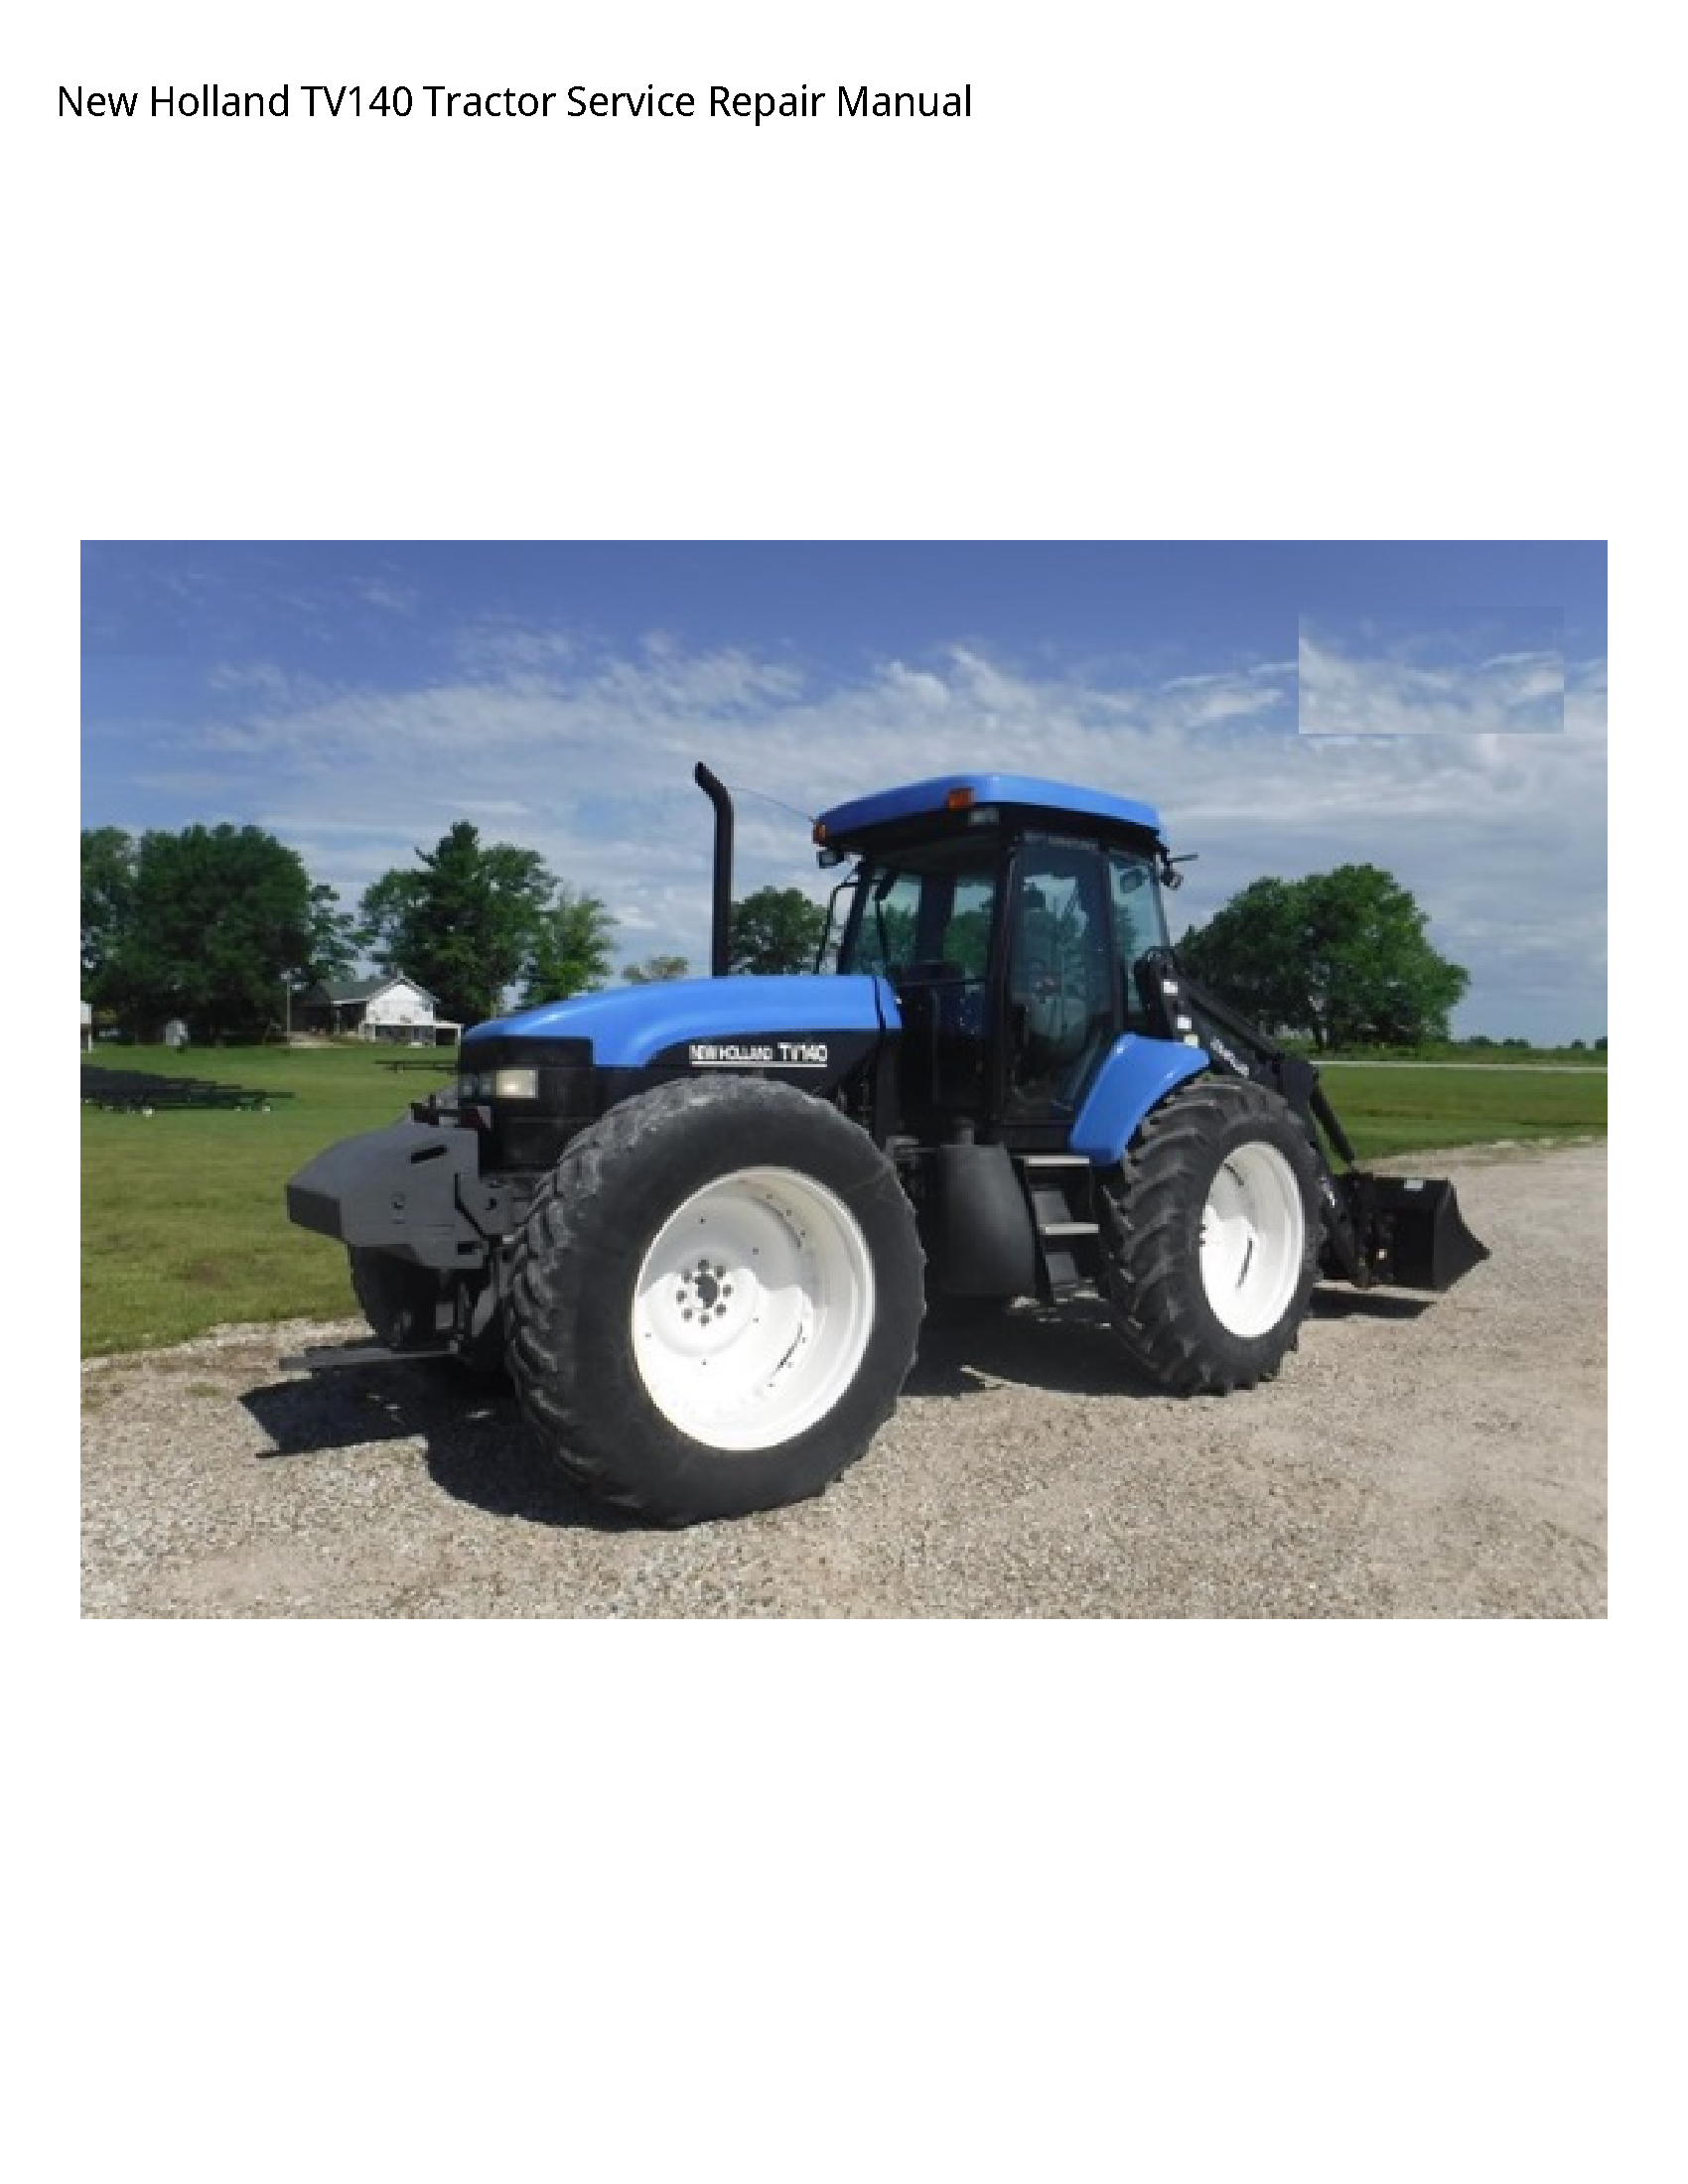 New Holland TV140 Tractor manual